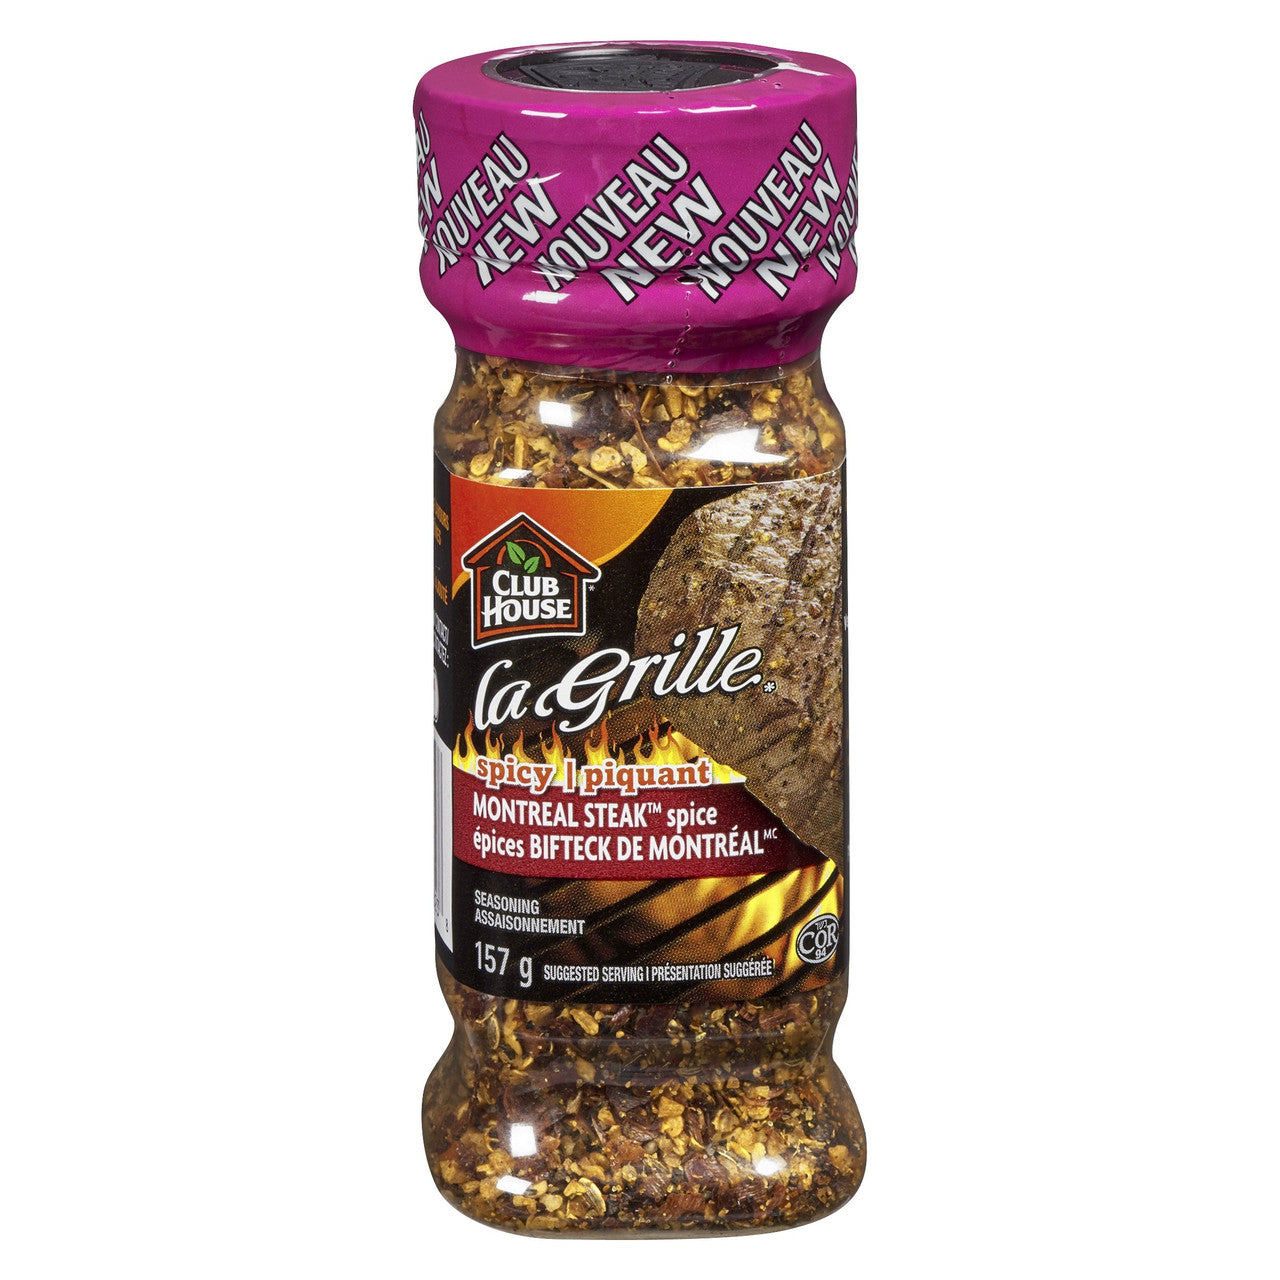 La Grille, Spicy Montreal Steak Spice Seasoning, 157g/5.5oz, (Imported from Canada)